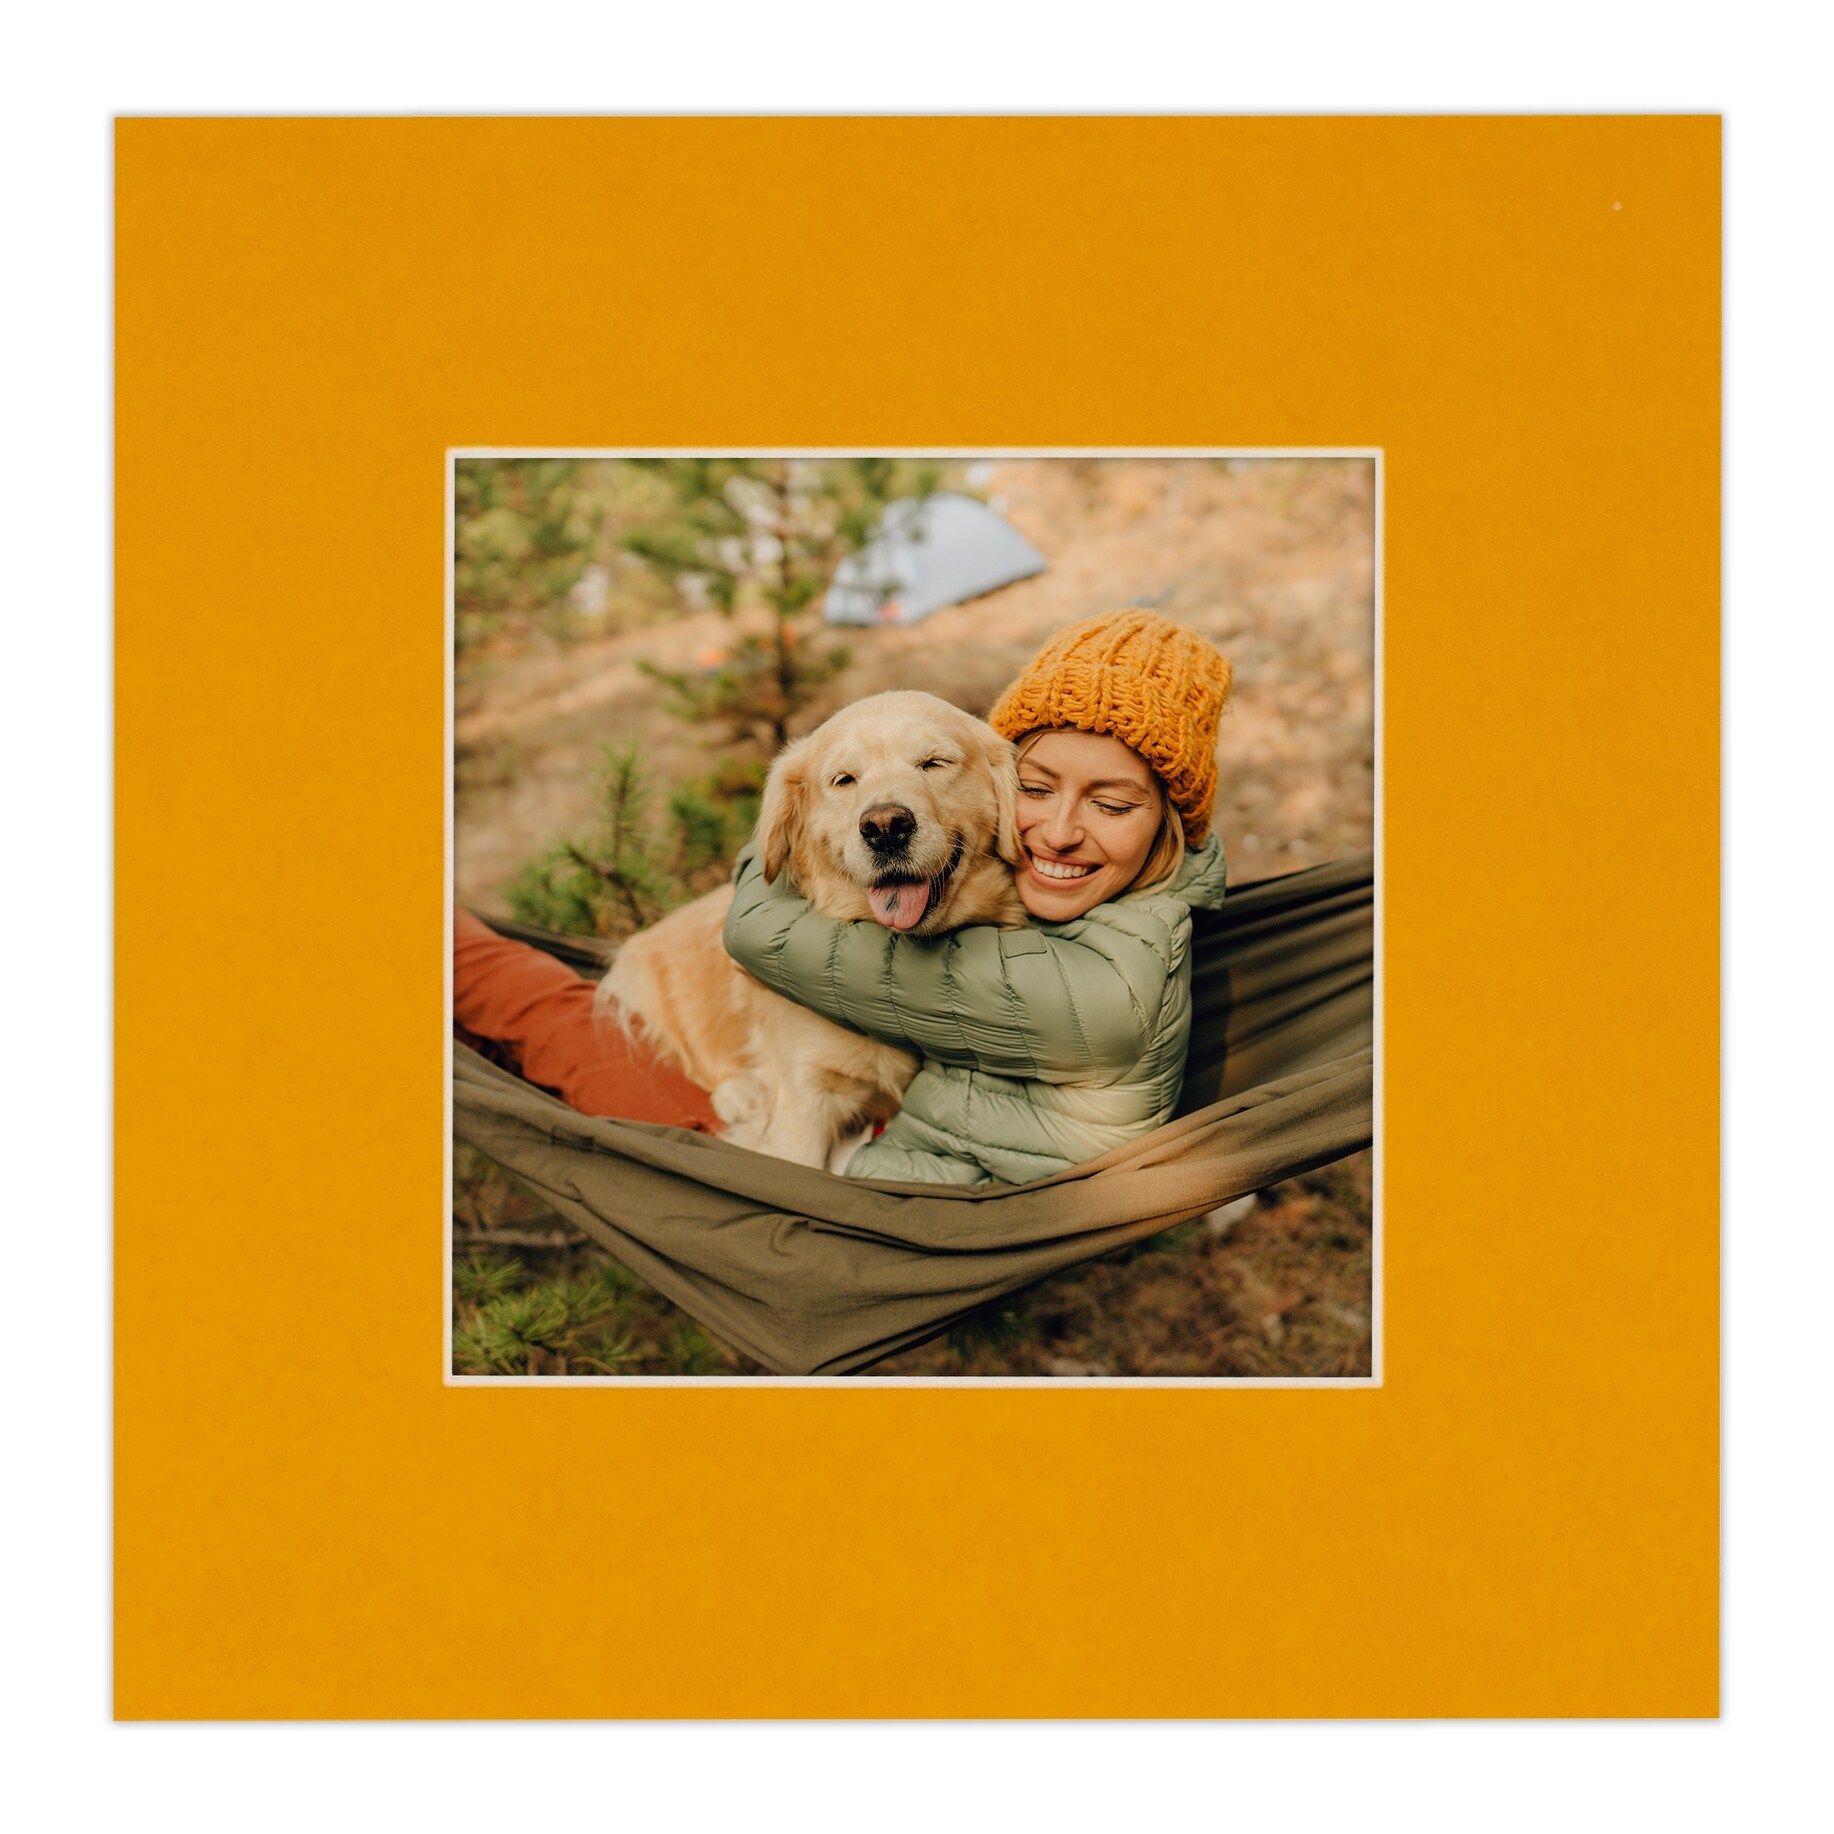 10x10 Mat for 20x20 Frame - Precut Mat Board Acid-Free Orange 10x10 Photo  Matte Made to Fit a 20x20 Picture Frame, Premium Matboard for Family  Photos